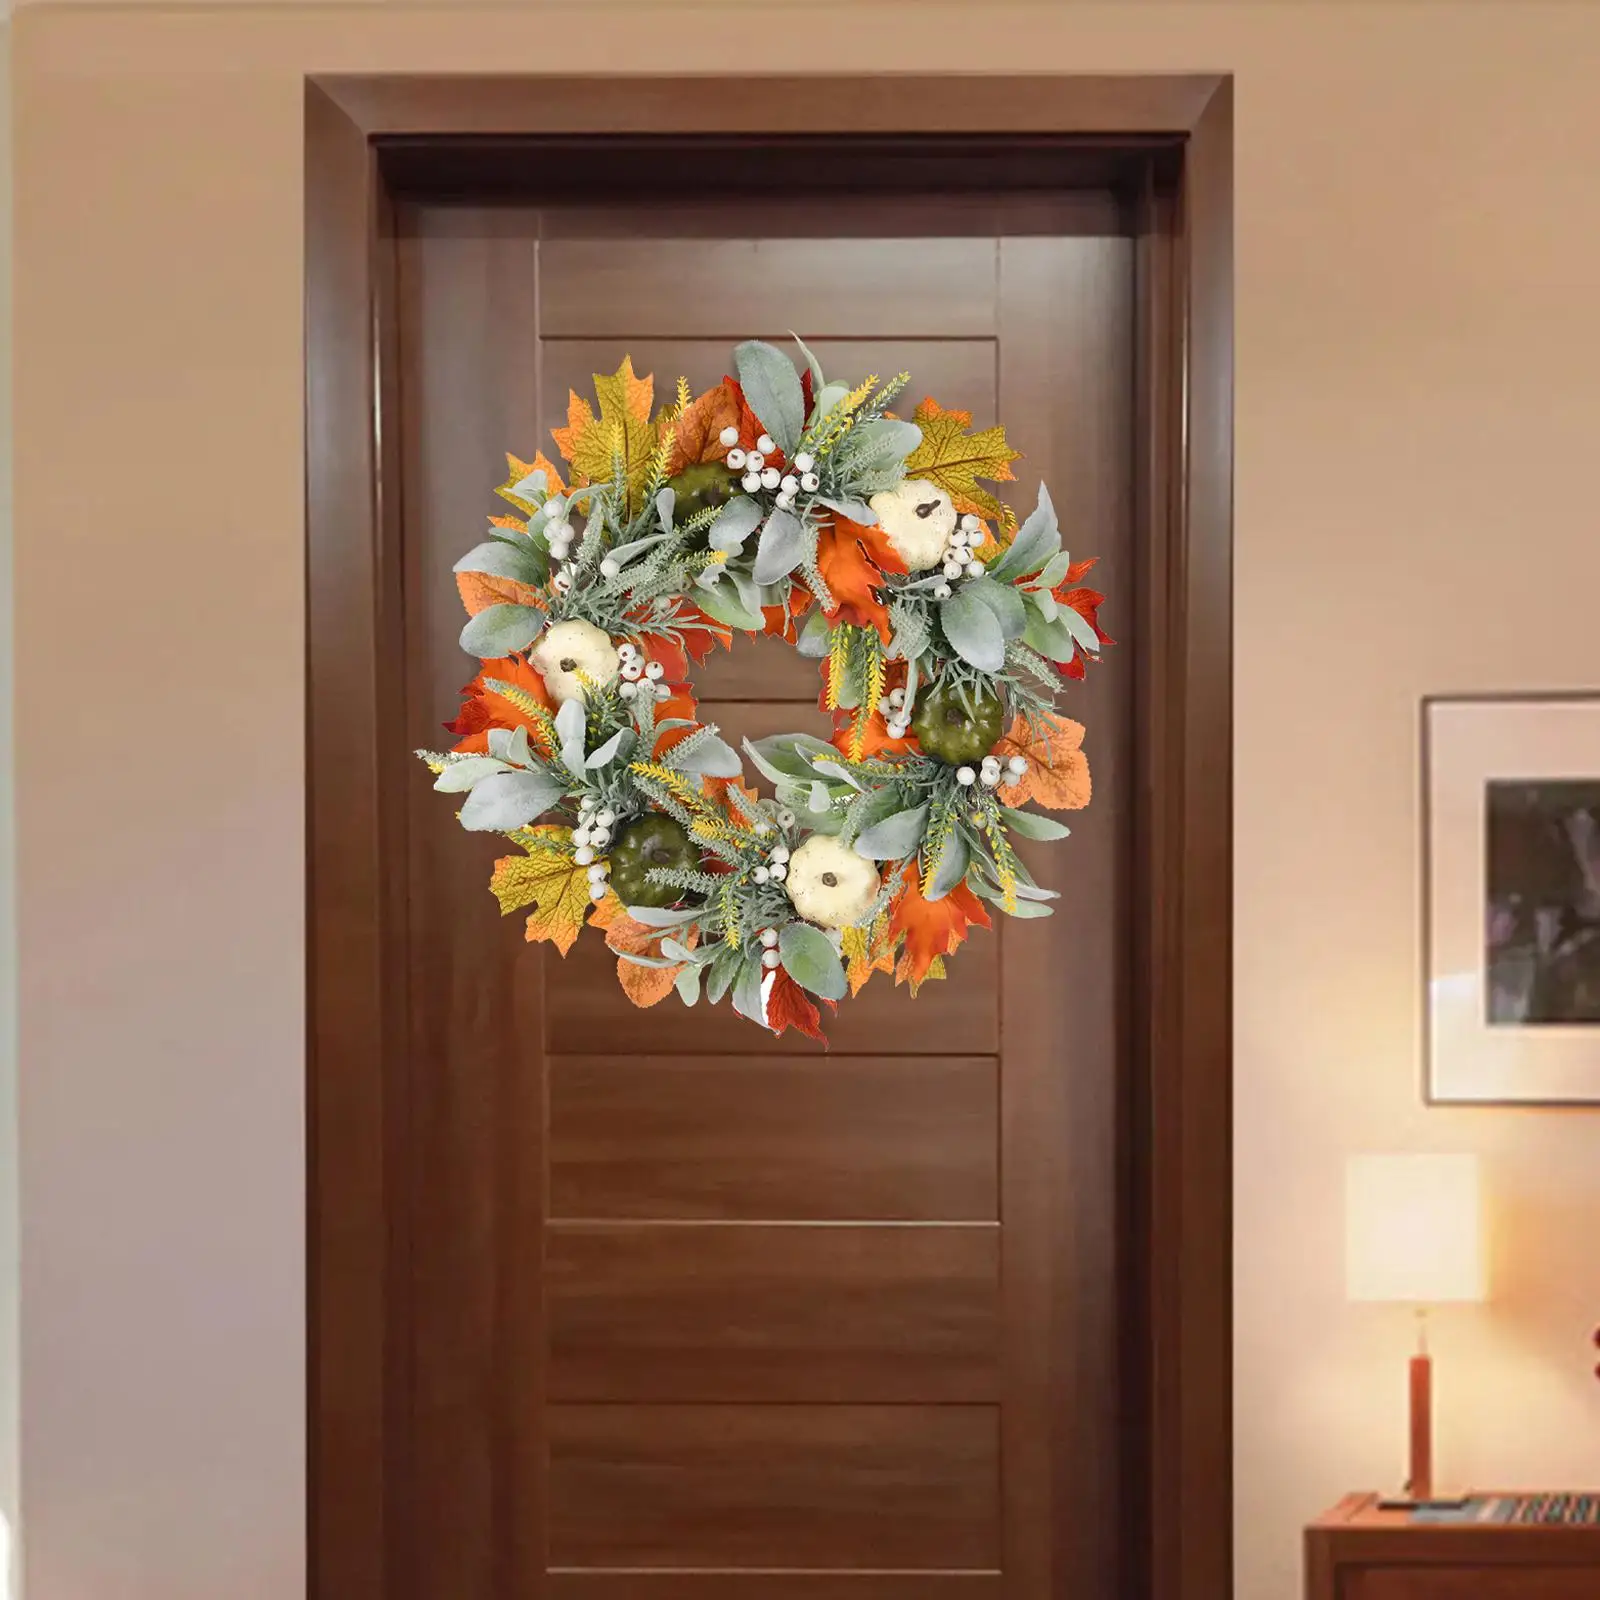 Autumn Wreath 17.72`` Ornament Garland with Pumpkin Leaves Harvest Wreath for Holiday Porch Indoor Outdoor Garden Decor